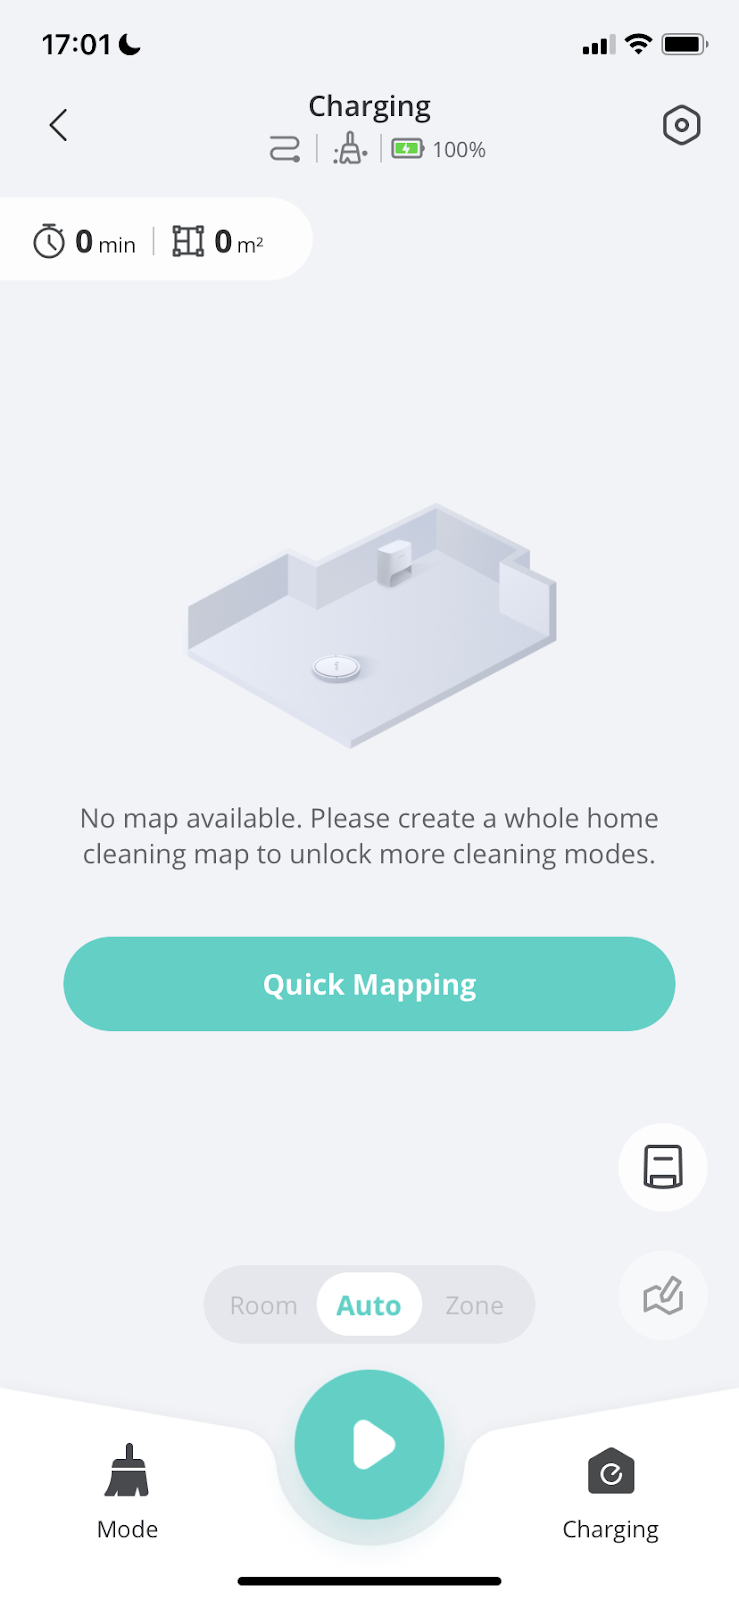 Cleaning Tips for the X9 Pro to Build a Map Quickly